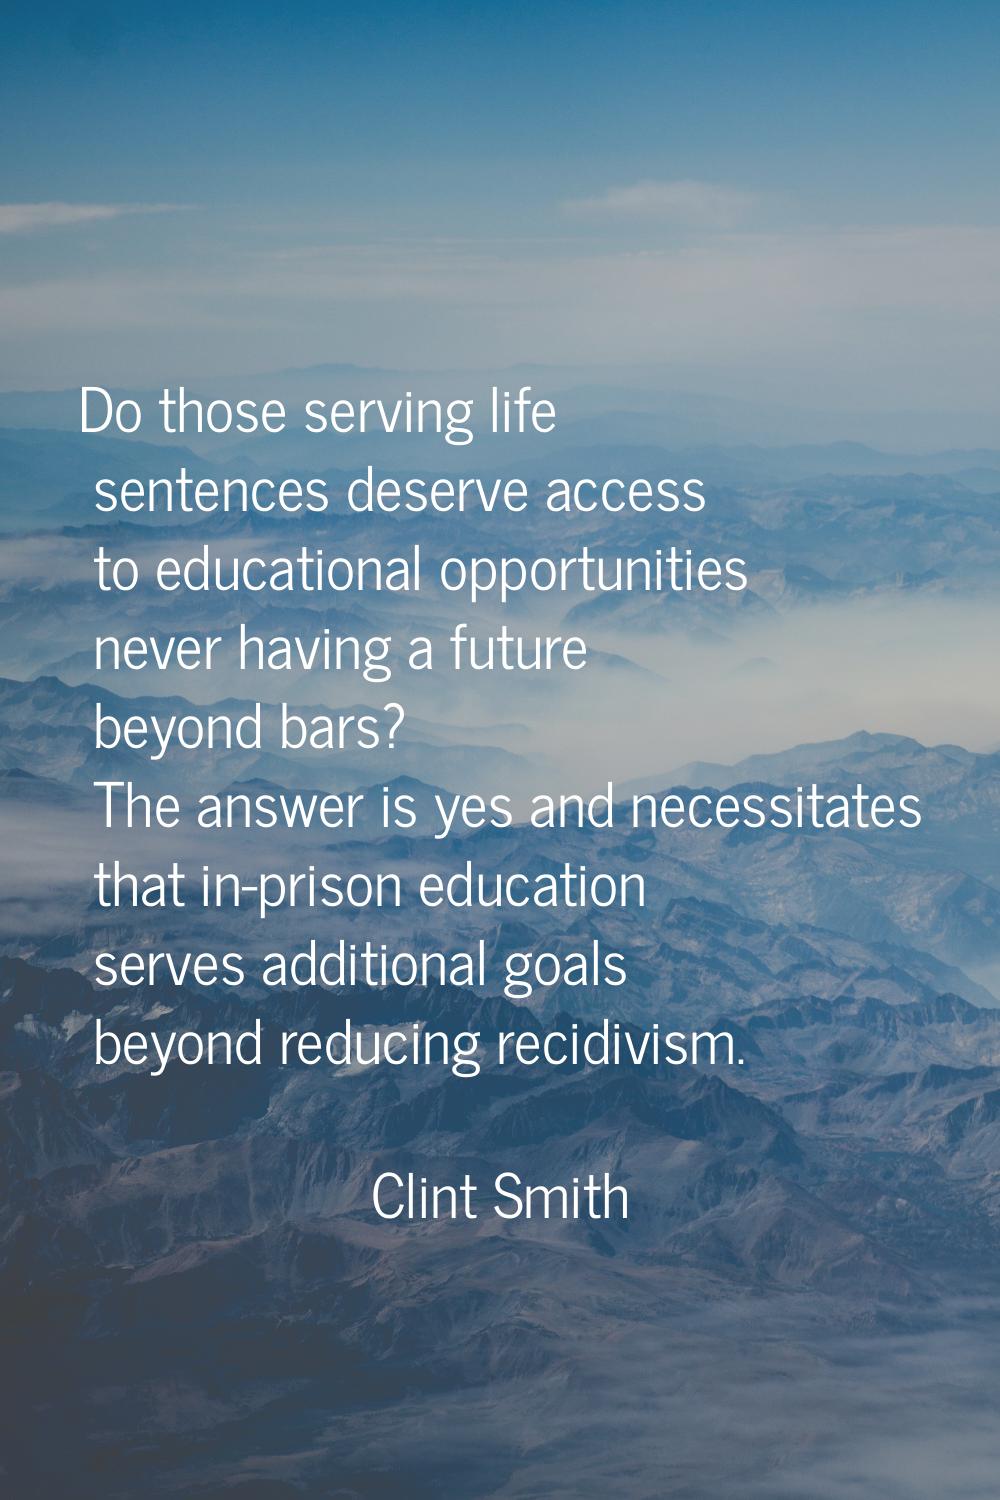 Do those serving life sentences deserve access to educational opportunities never having a future b